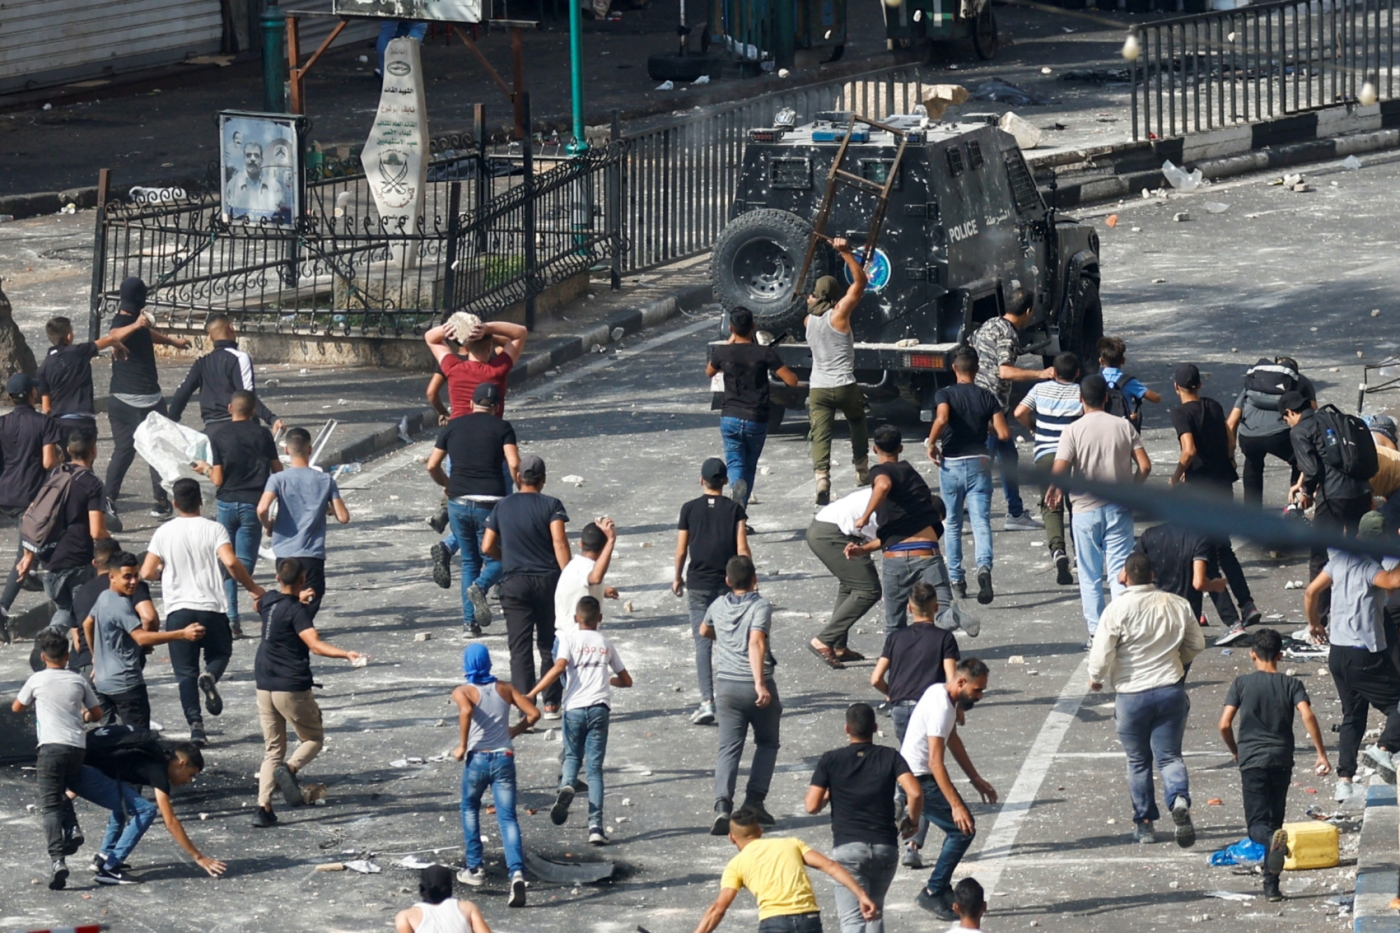 Palestinian demonstrators protesting the arrest of two Palestinian fighters clash with Palestinian security forces, in Nablus in the occupied West Bank, 20 September 2022 (Reuters)